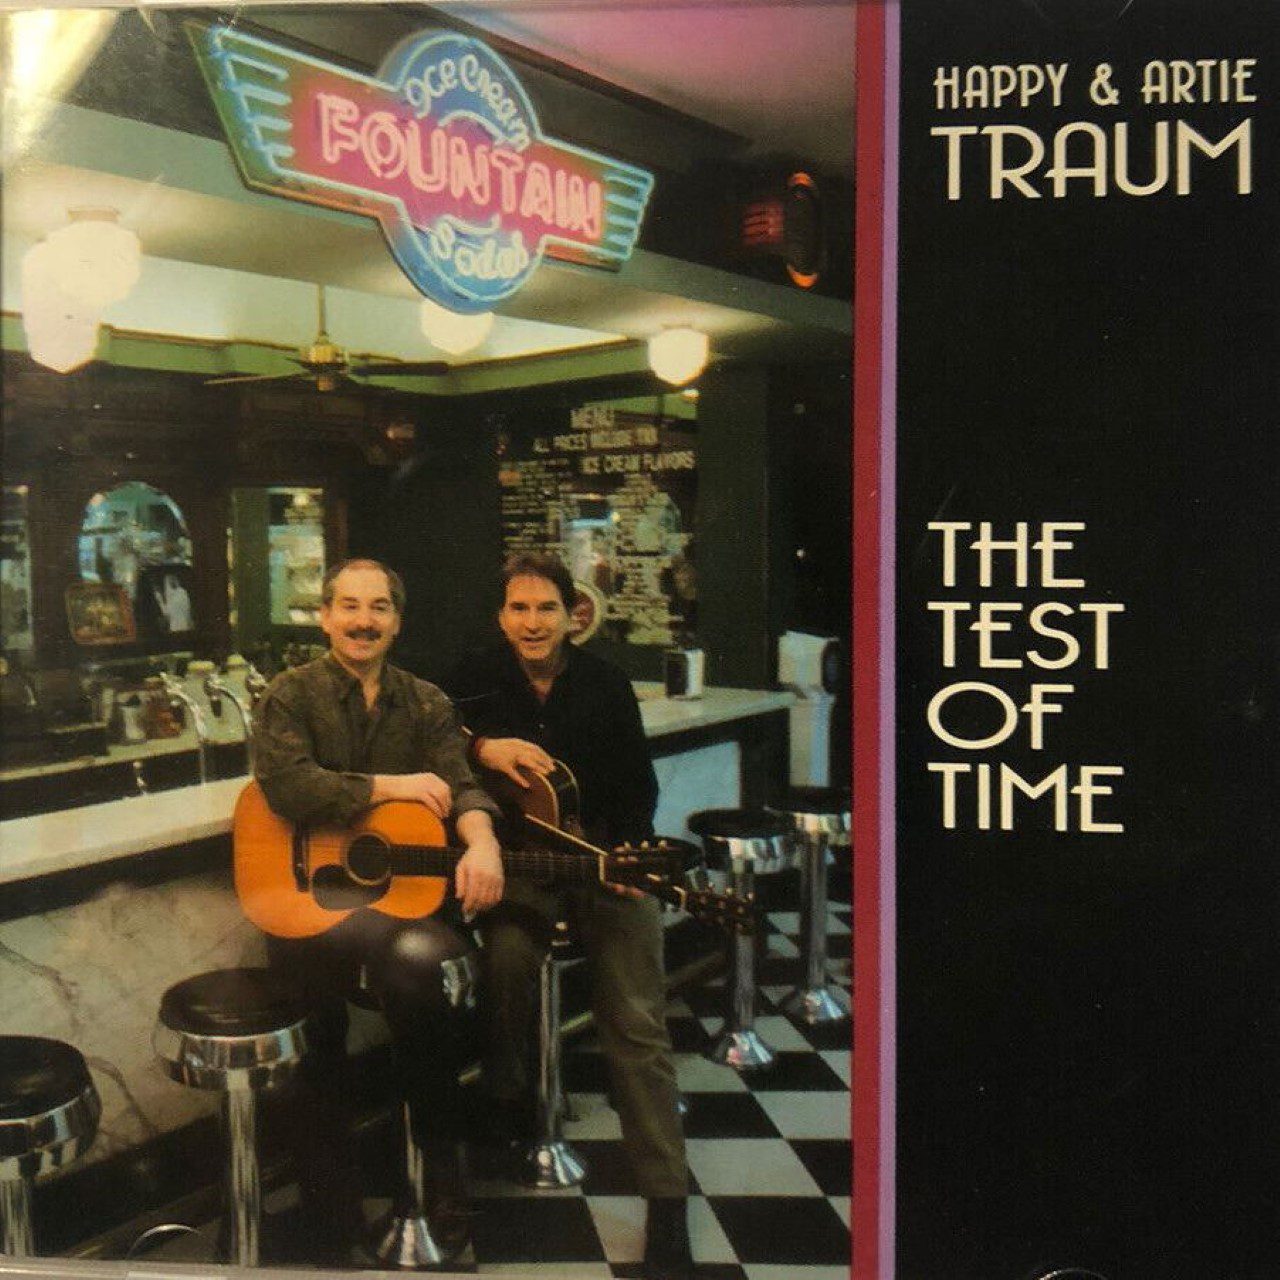 Happy & Artie Traum – The Test Of Time cover album